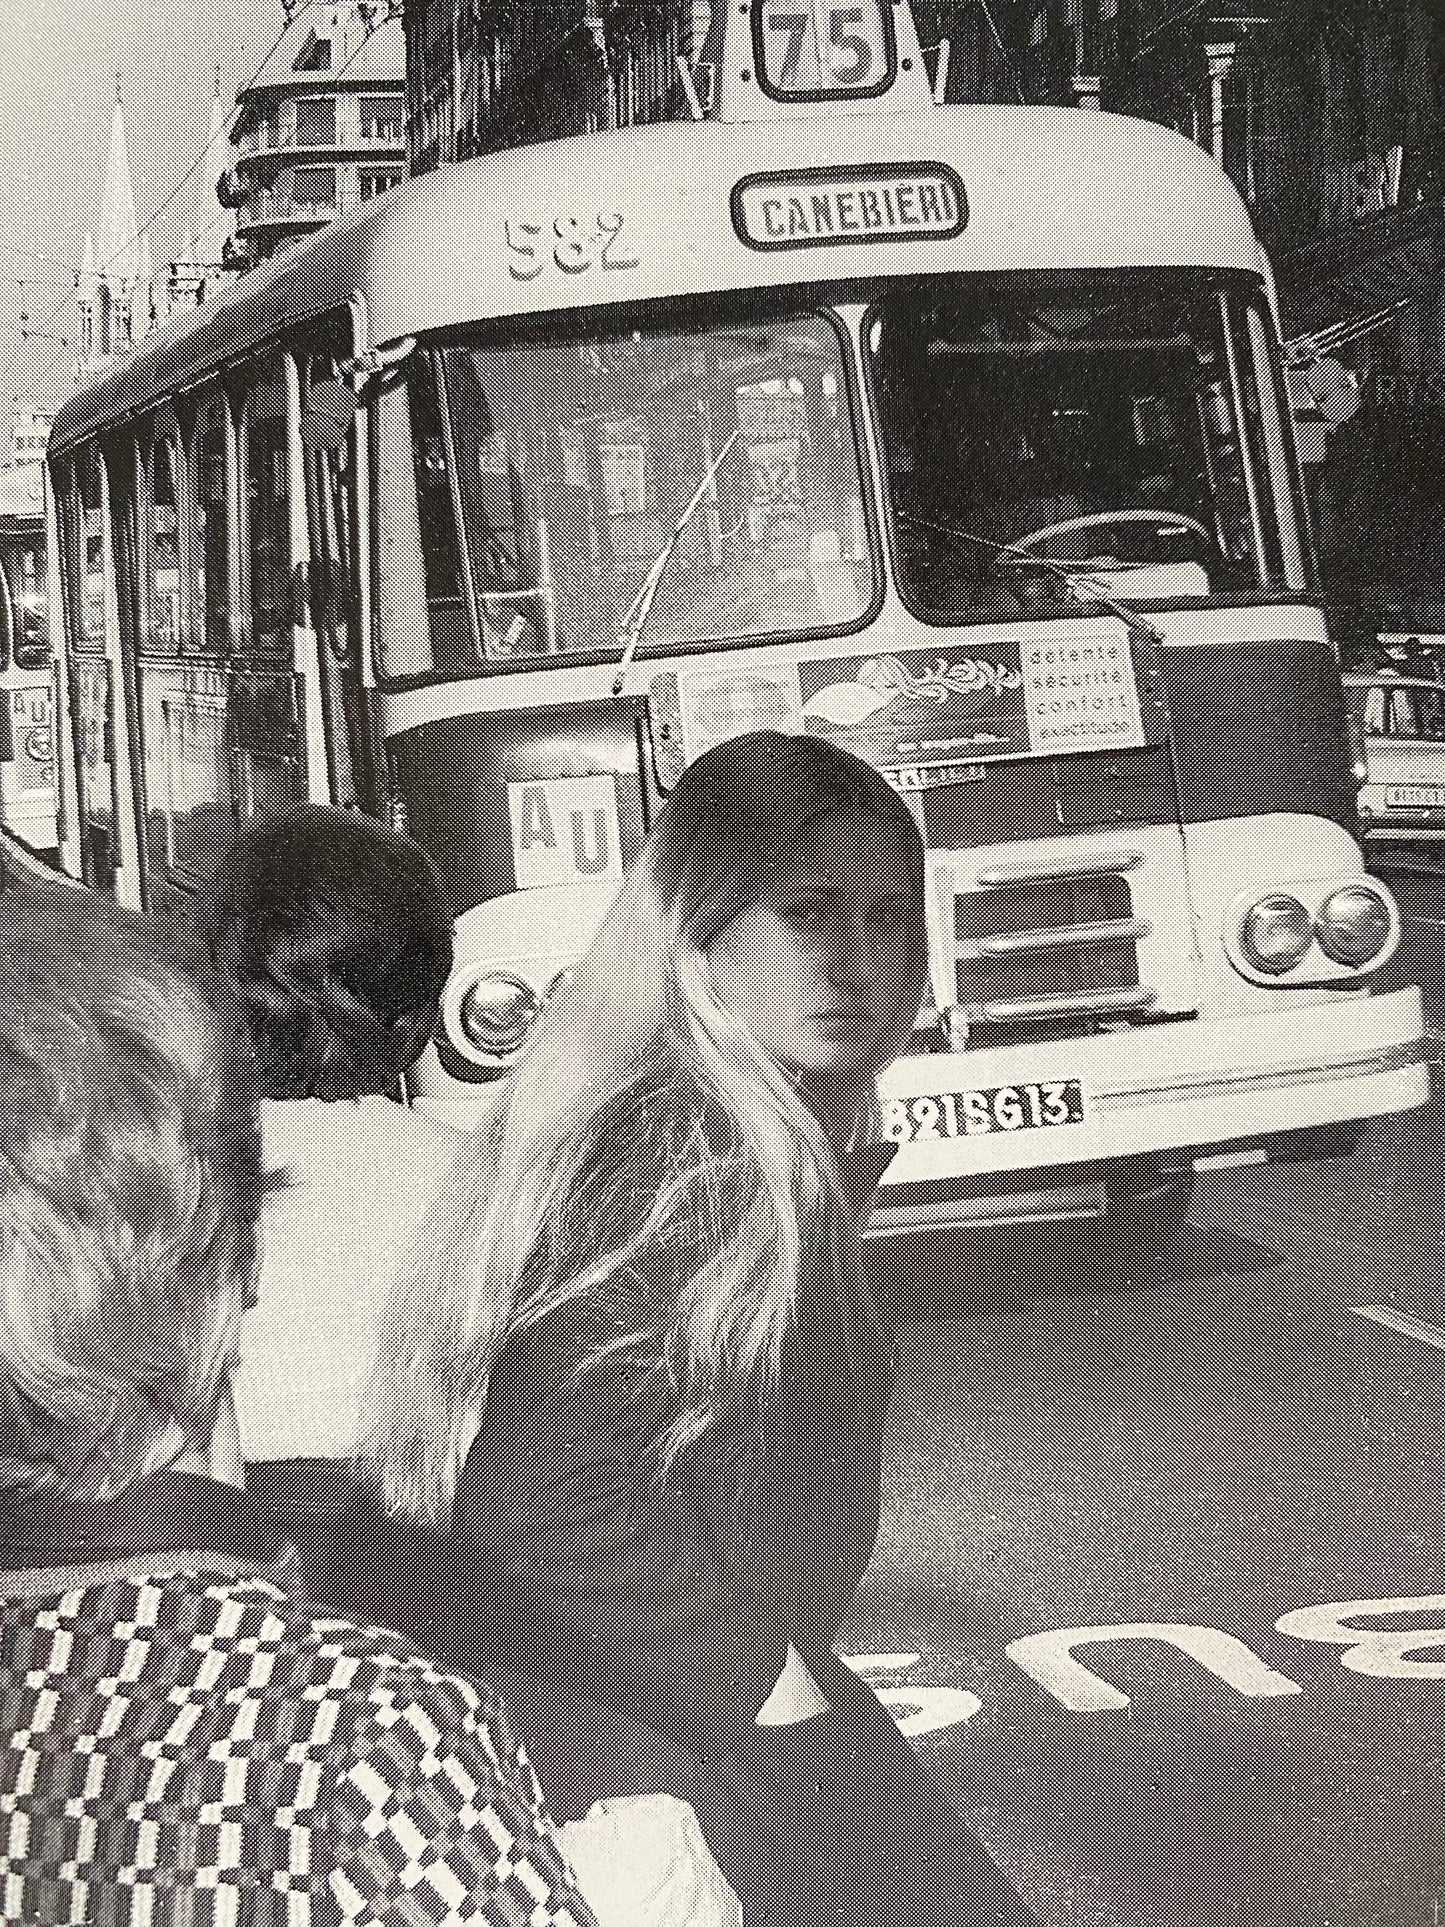 Robert E. Jowitt -  The Girl in the Street: Or the Bedside Bus Book (1991)